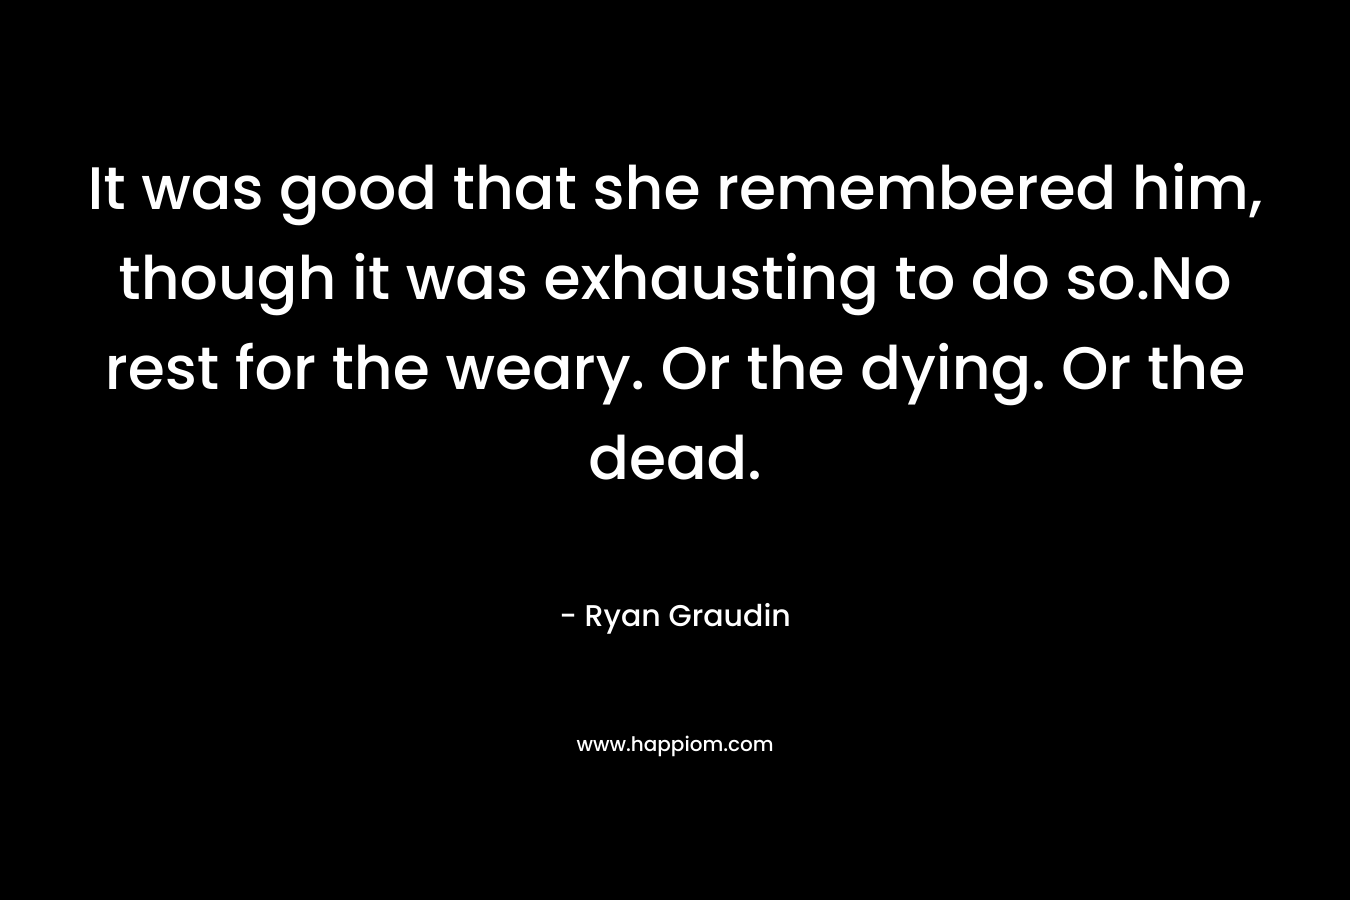 It was good that she remembered him, though it was exhausting to do so.No rest for the weary. Or the dying. Or the dead. – Ryan Graudin